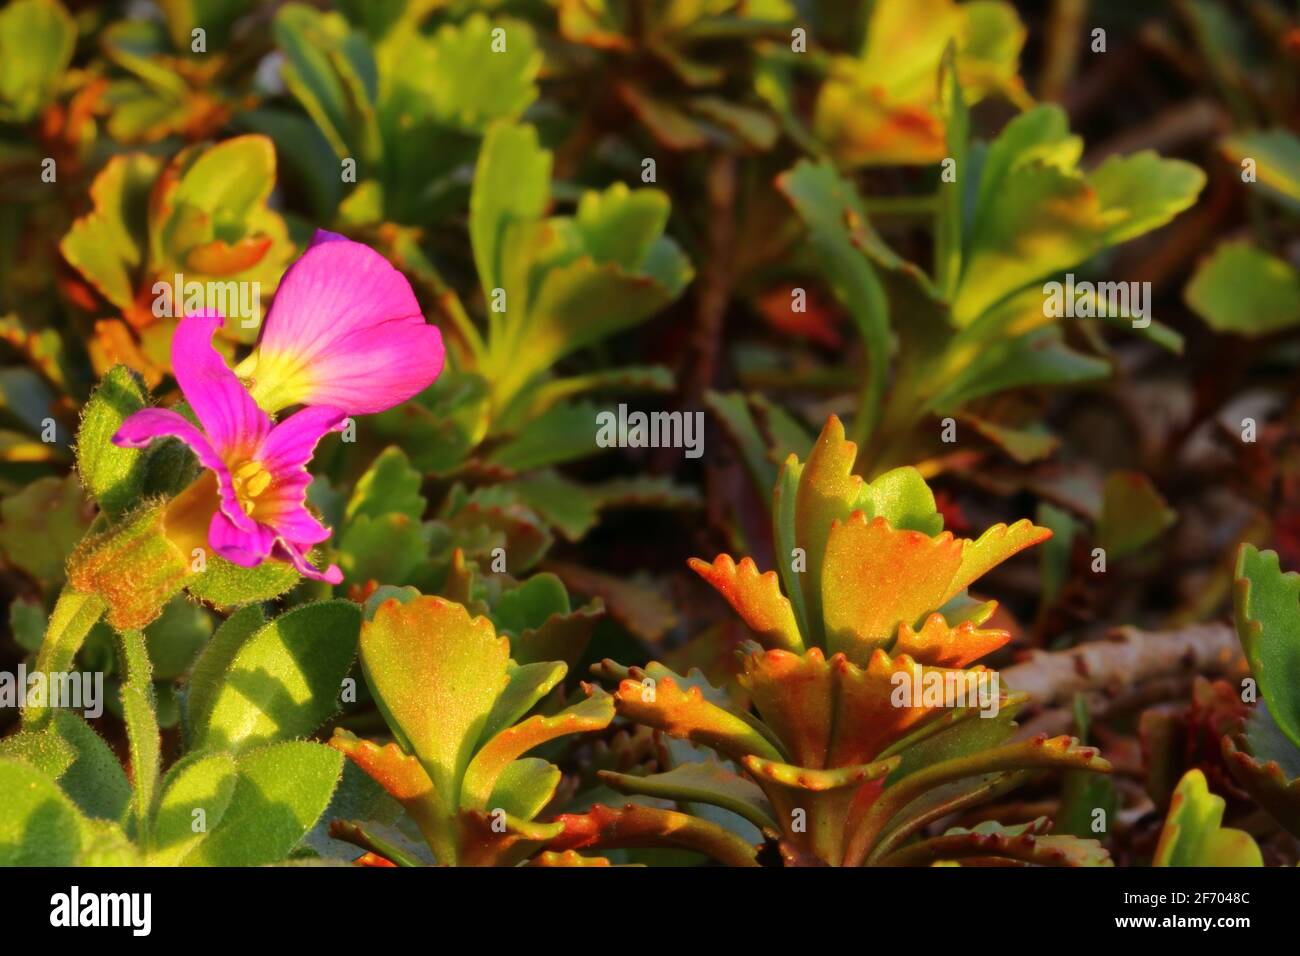 close up of a pink flowering plant in a garden Stock Photo